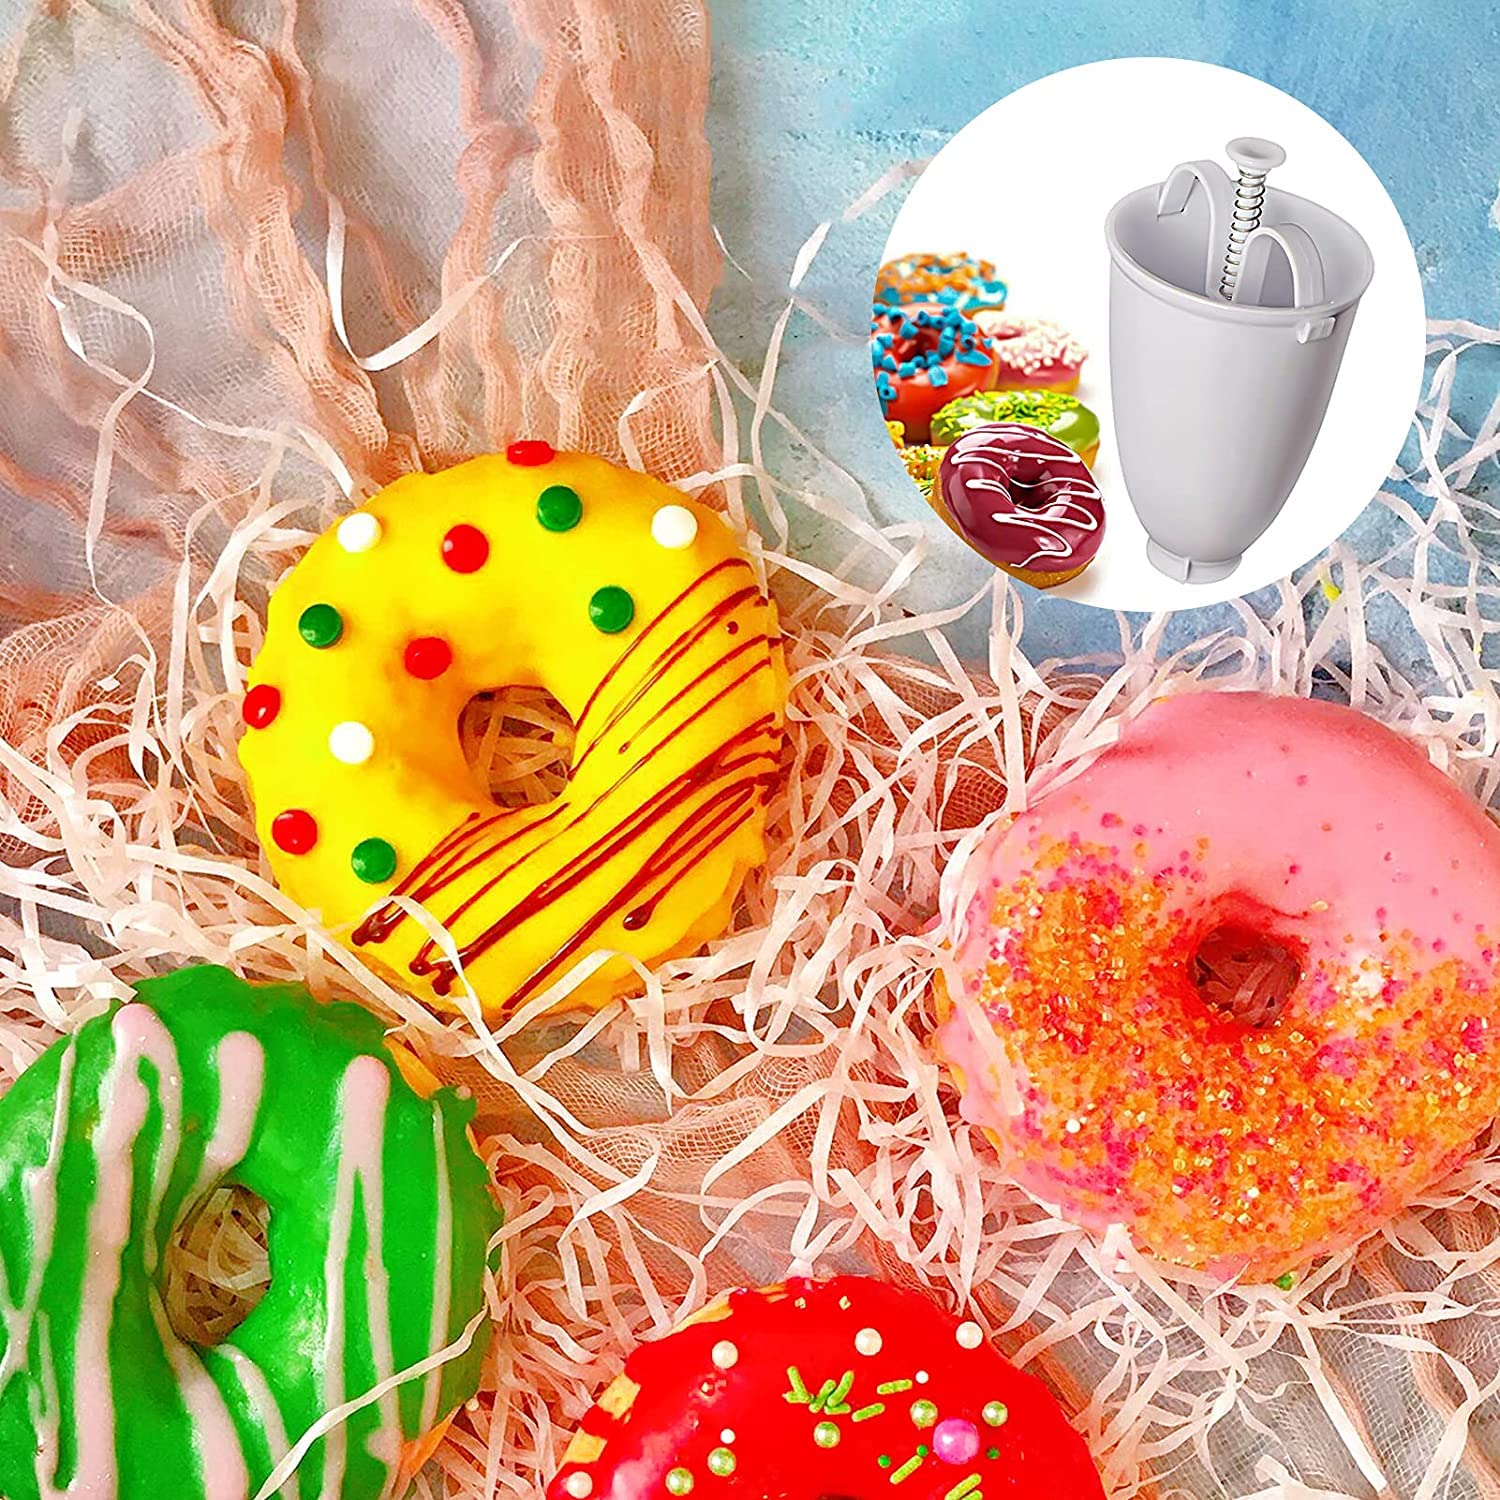 🔥Christmas Hot Sale [50% OFF] Perfect Donuts Makers DIY Baking Tool - Buy 2 Get 1 Free NOW